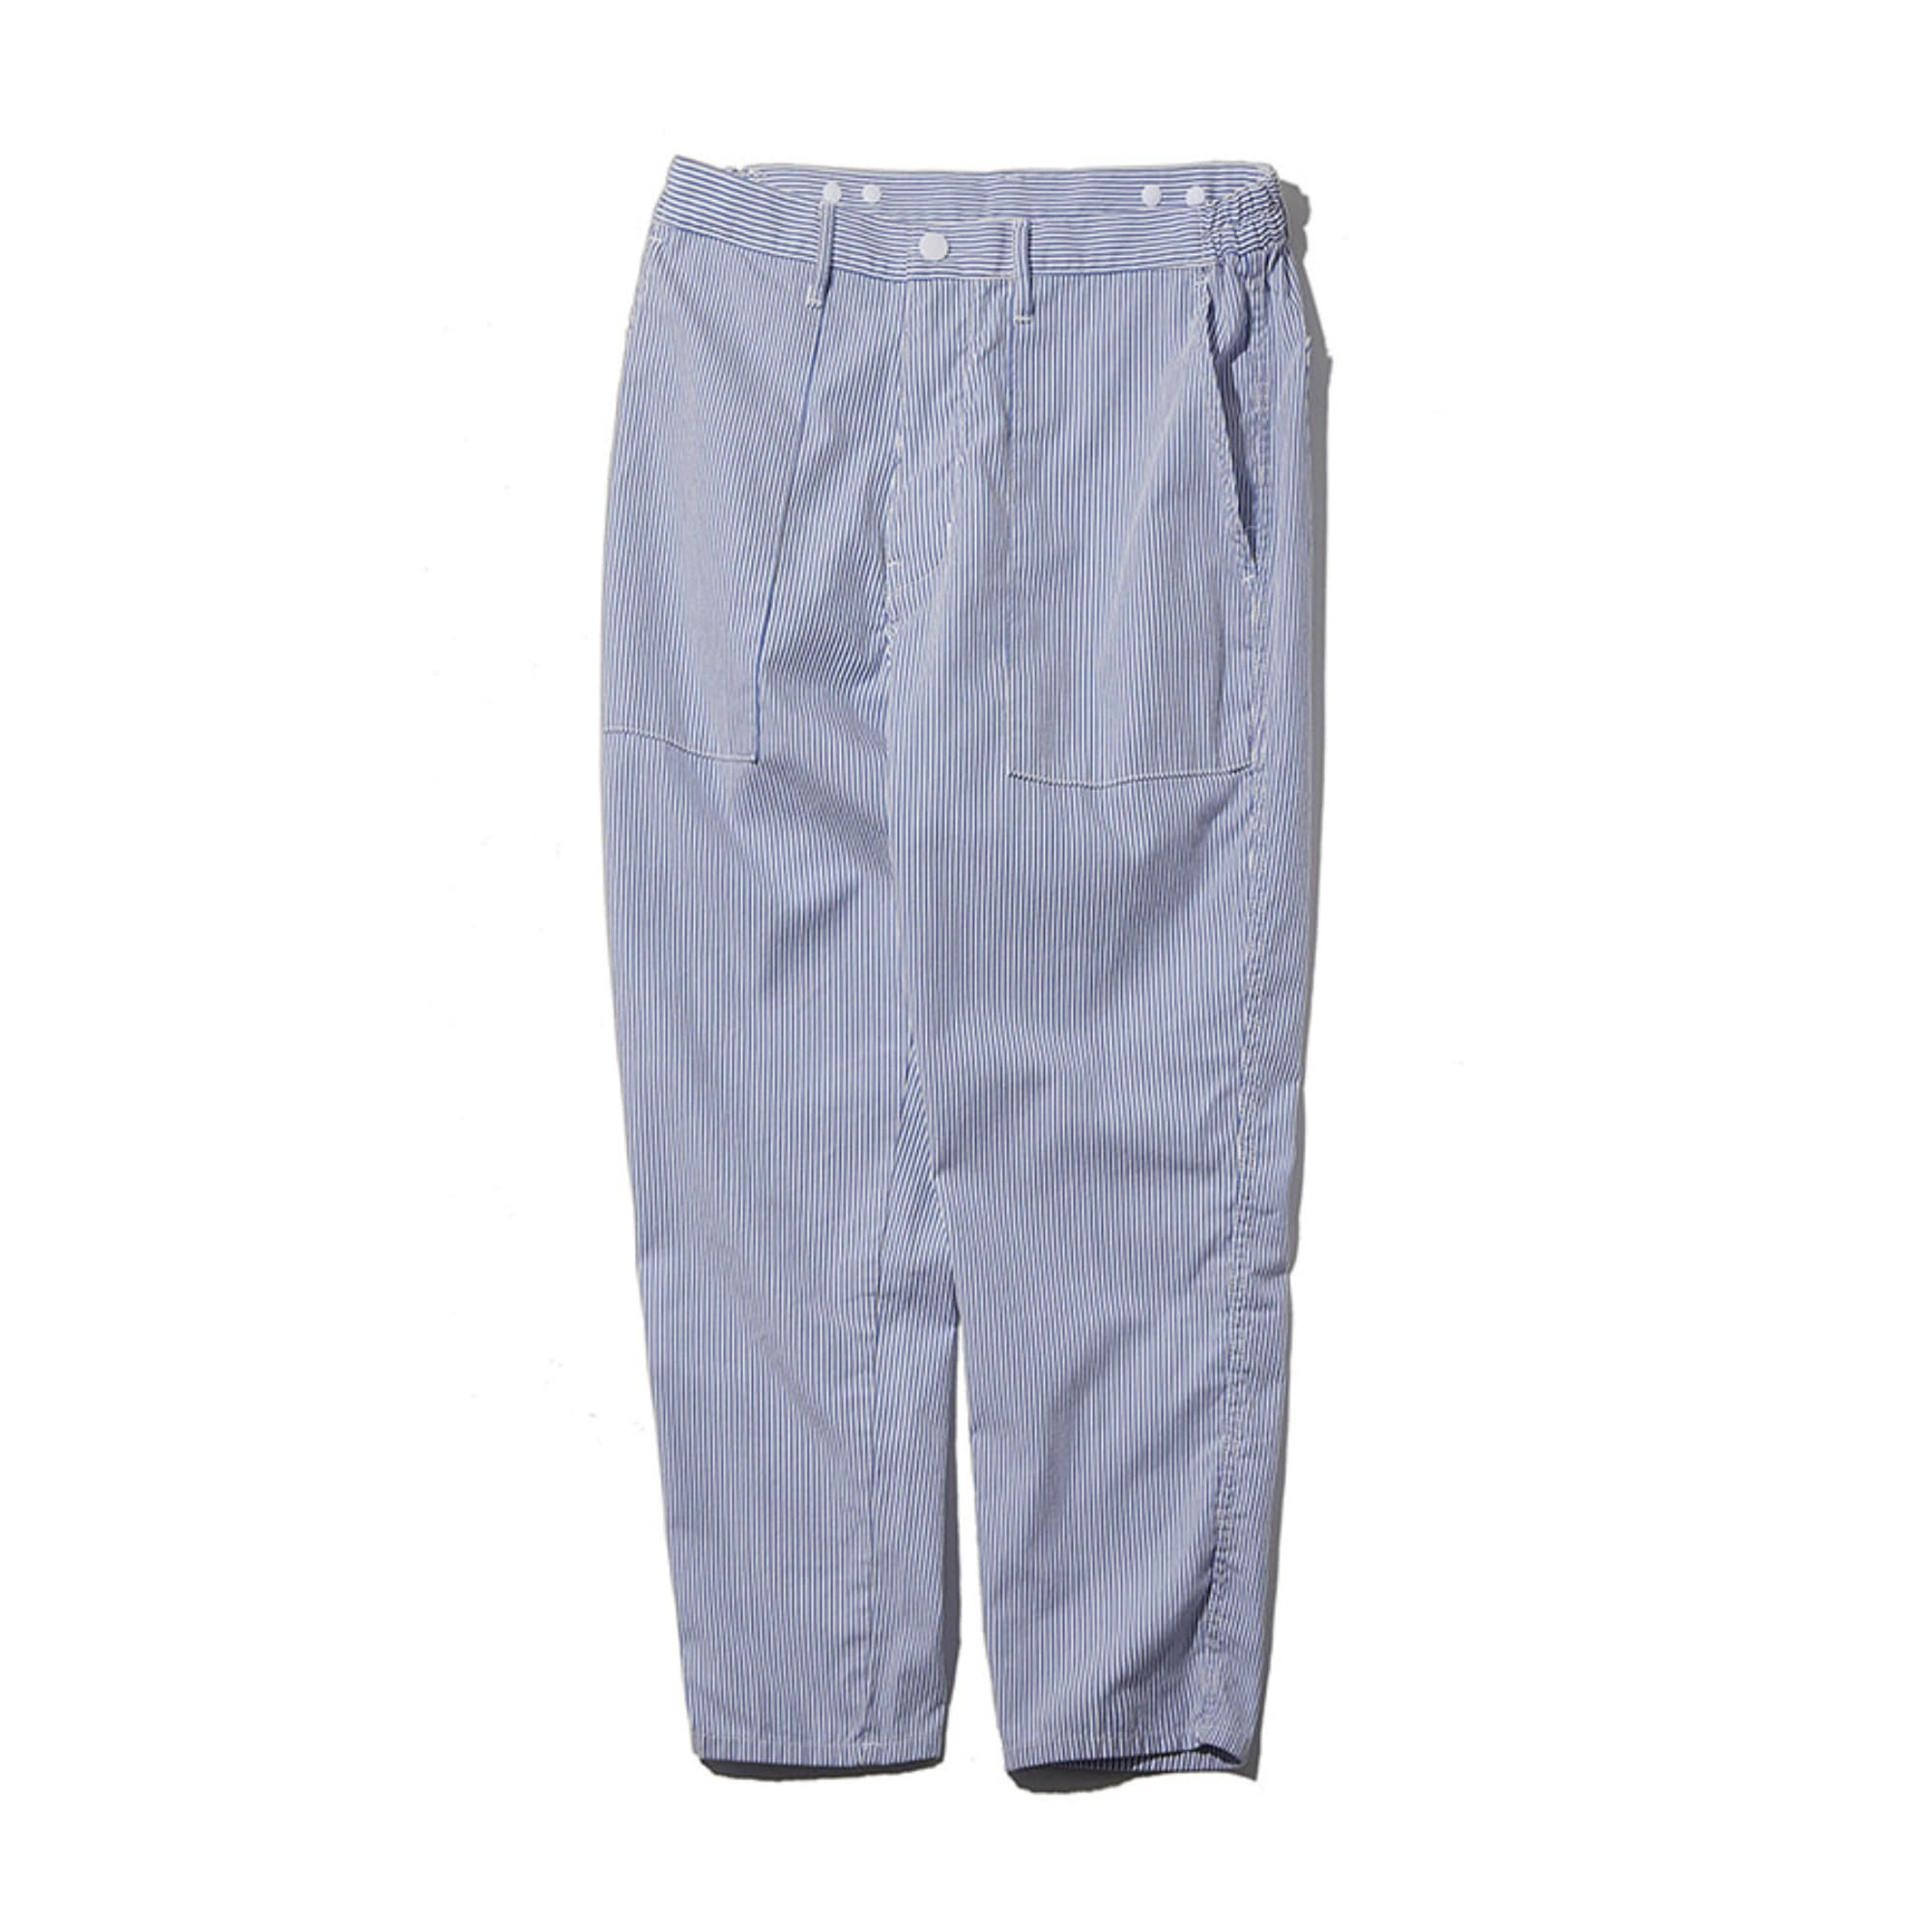 305-1 TAPERED FATIGUE PANTS (BLUE STRIPE)